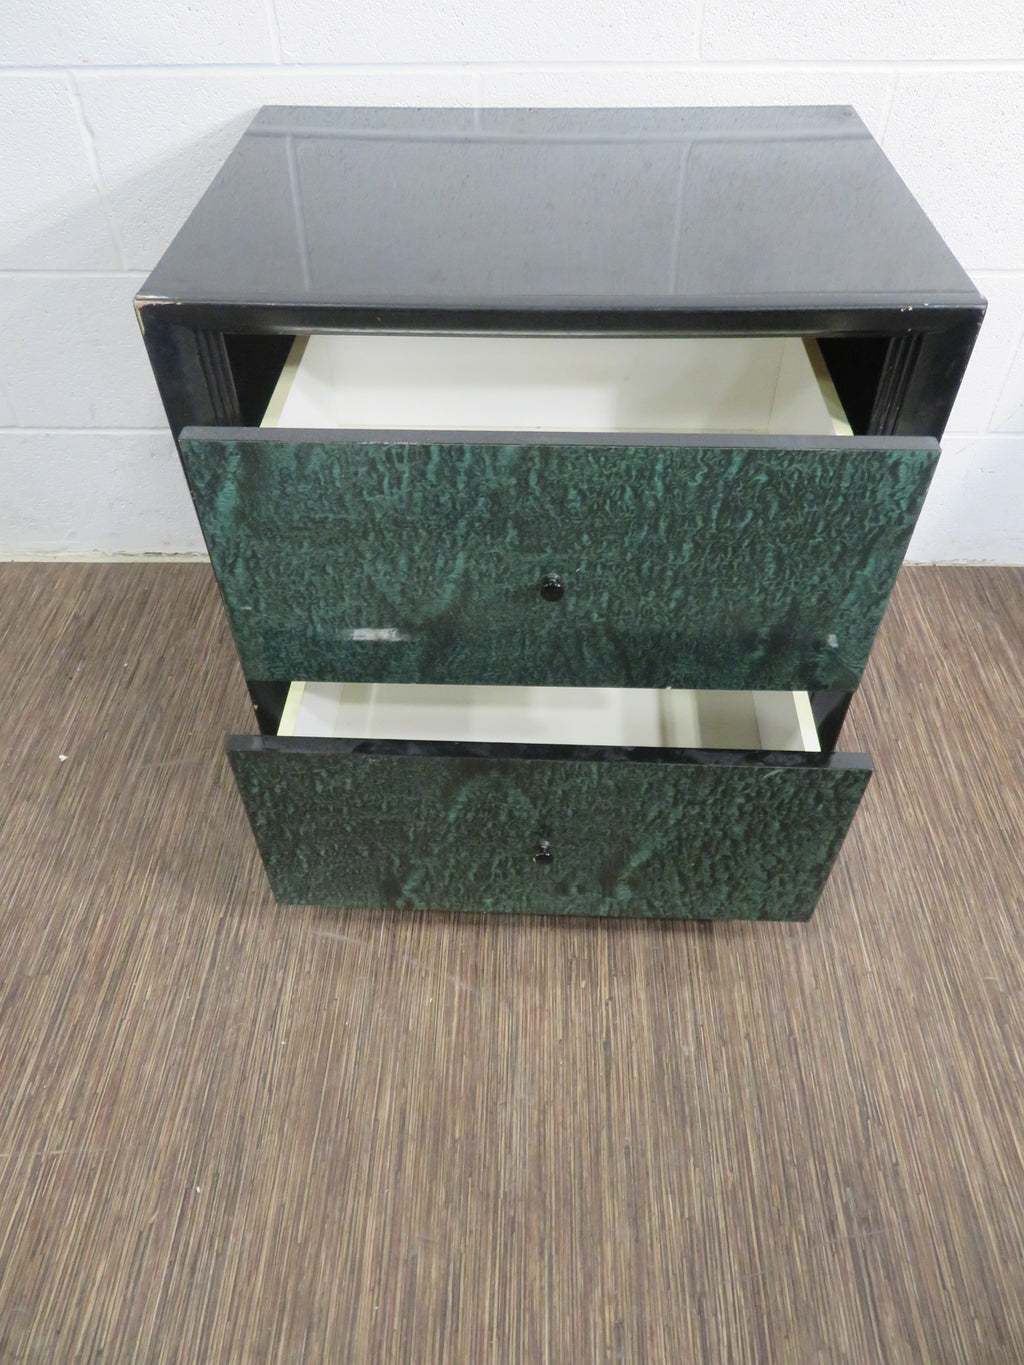 2-Drawer Side Table in Black with Green Drawers